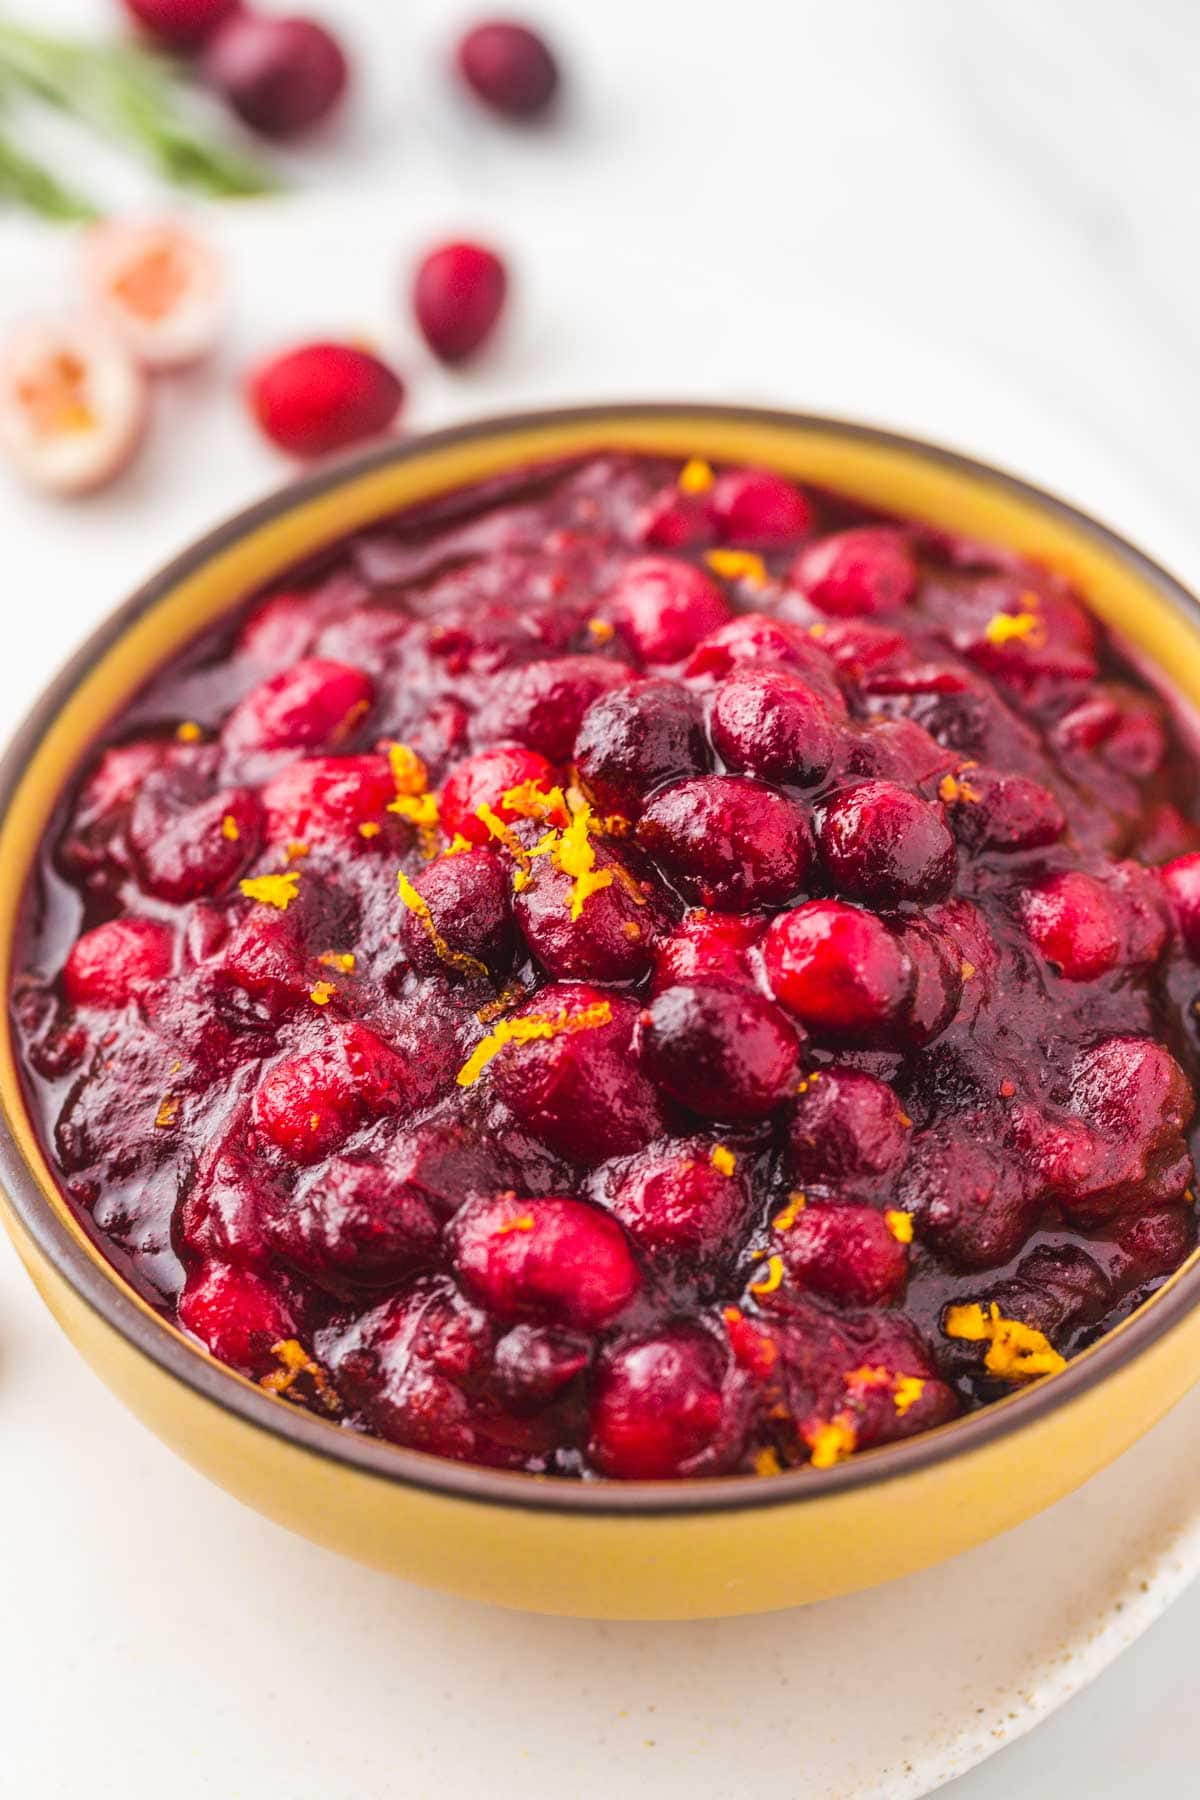 Cranberry sauce served in a yellow bowl garnish with orange zest